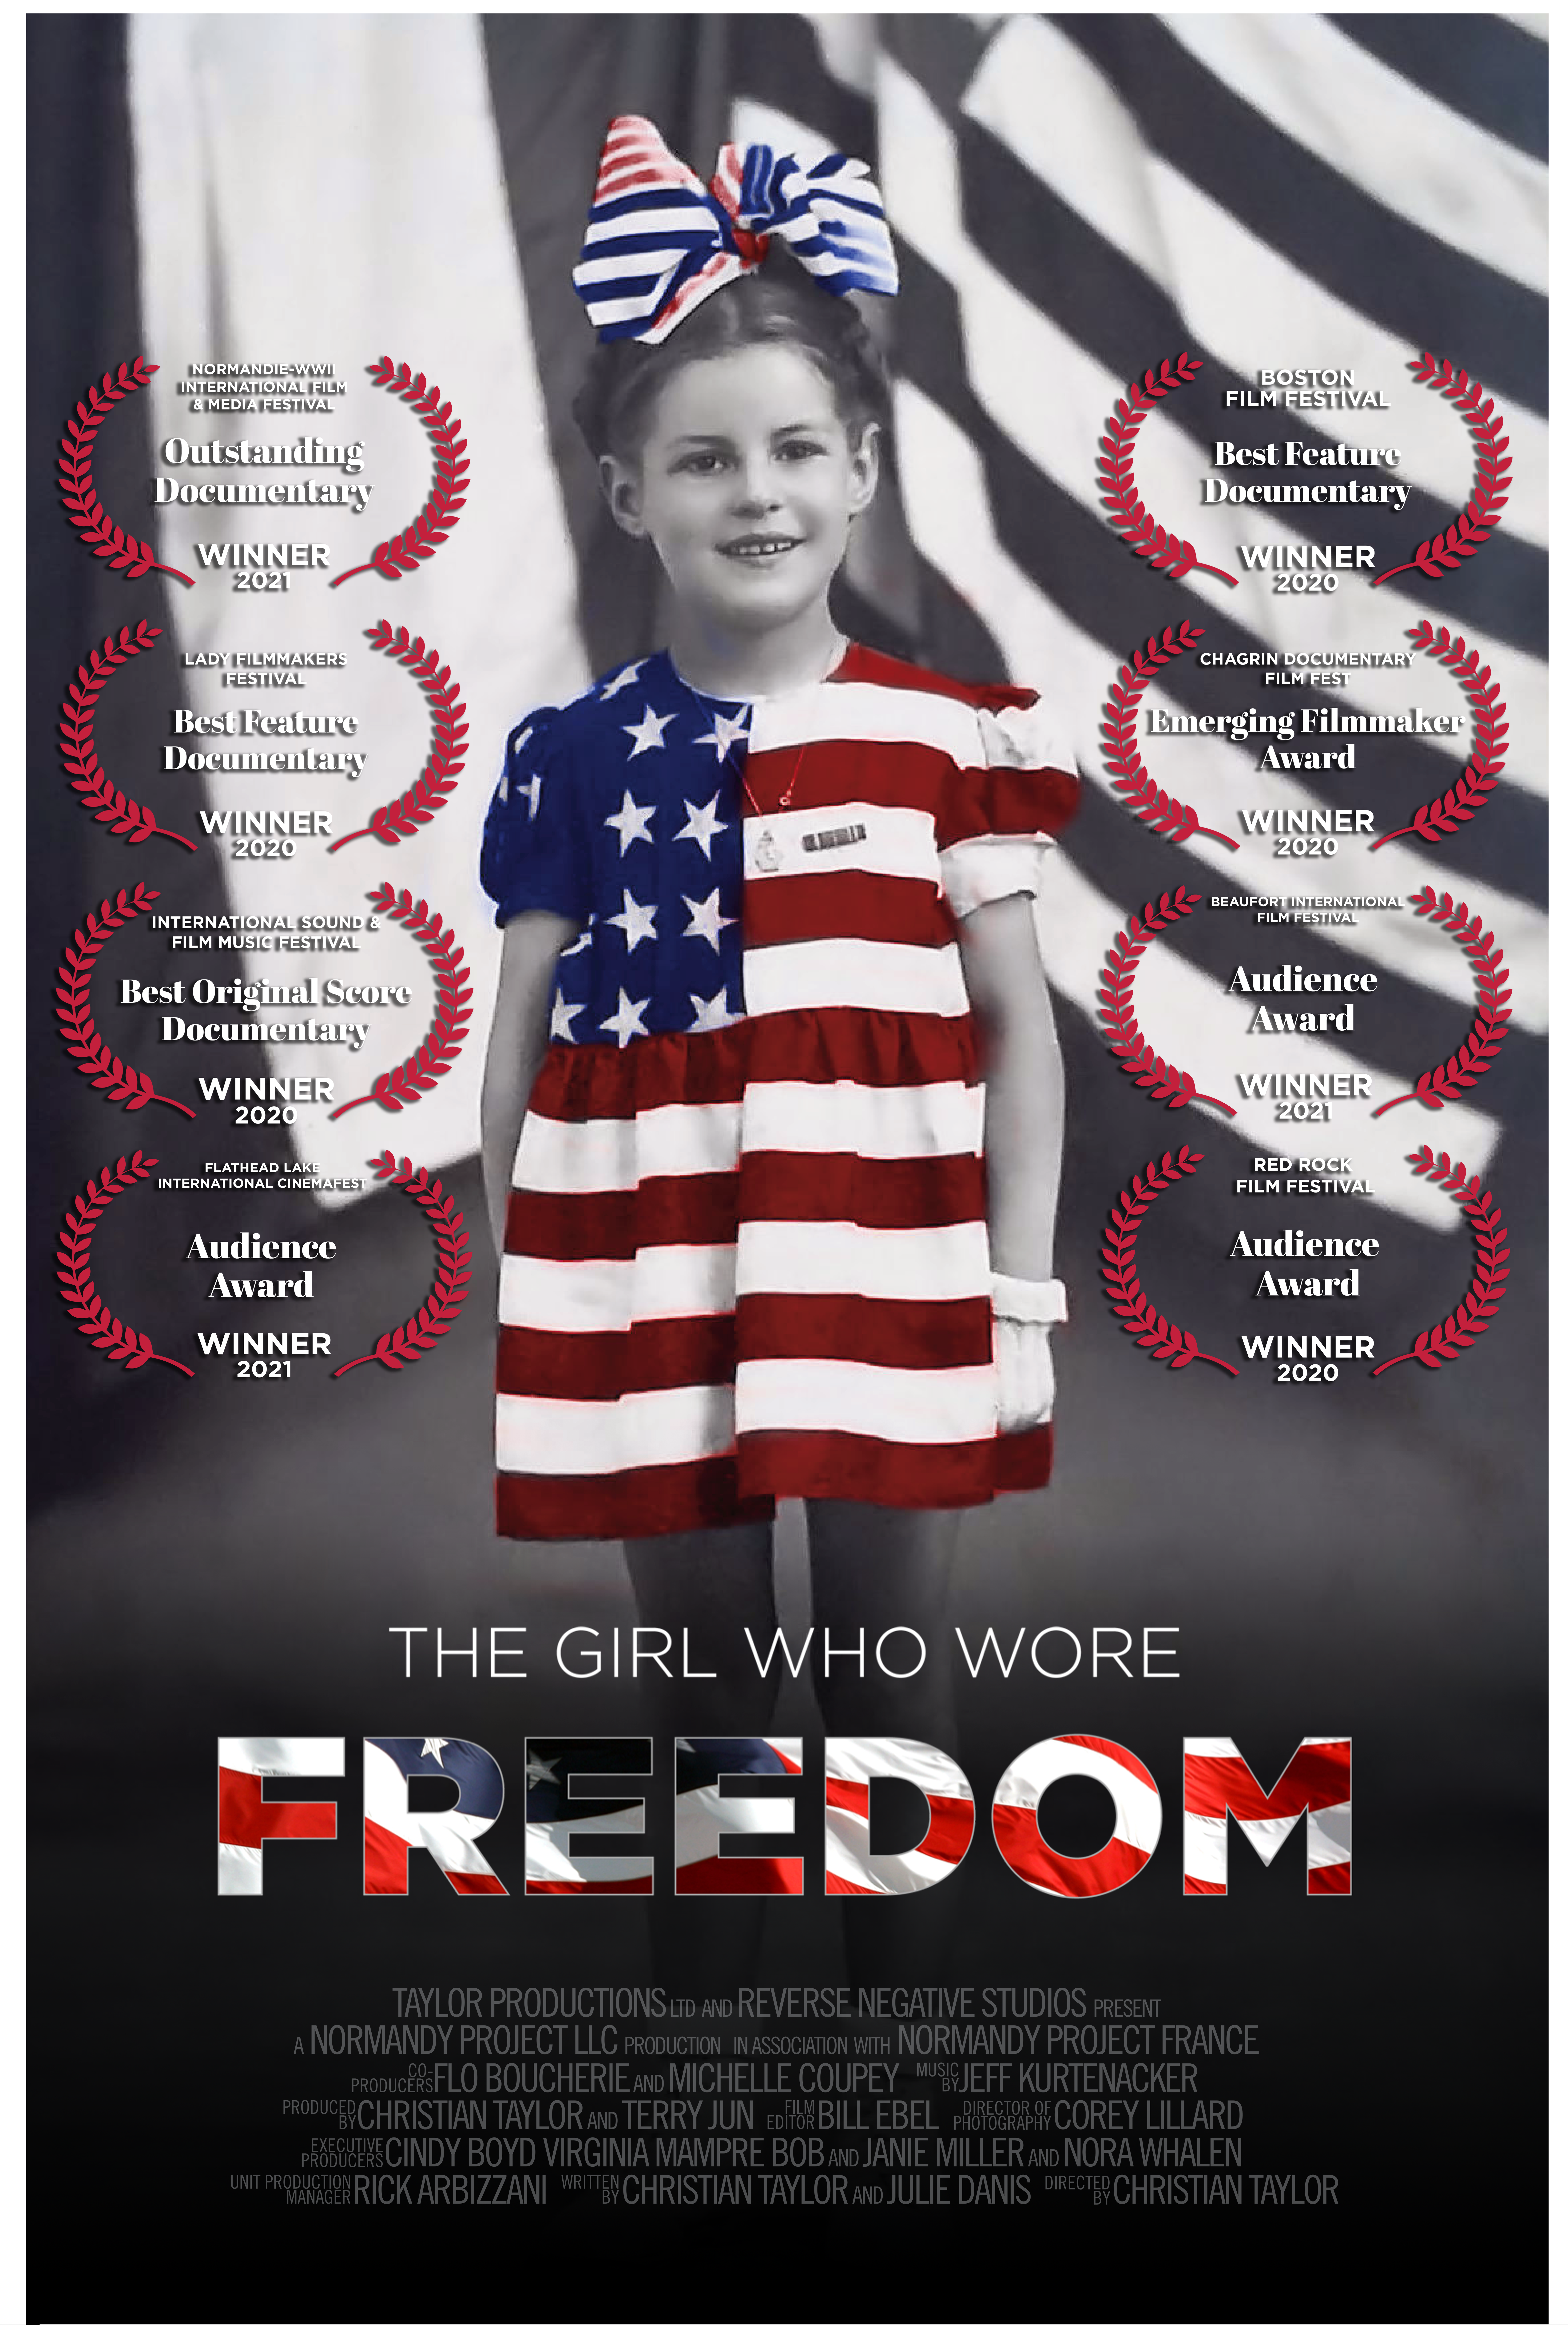 The Girl Who Wore Freedom movie poster vertical